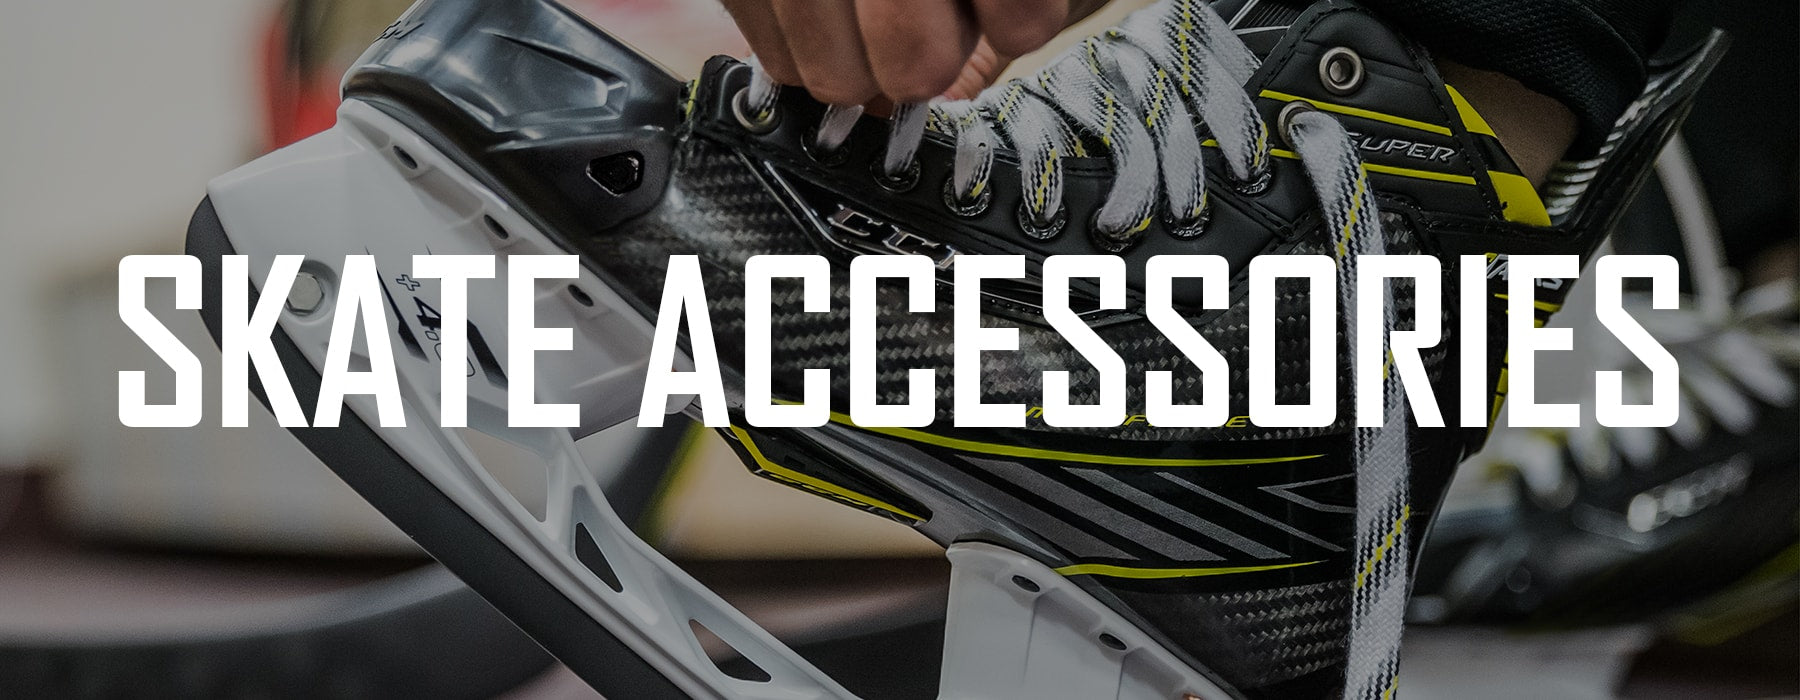 Hockey Skate Accessories For Sale Online and In Store Pro Hockey Life